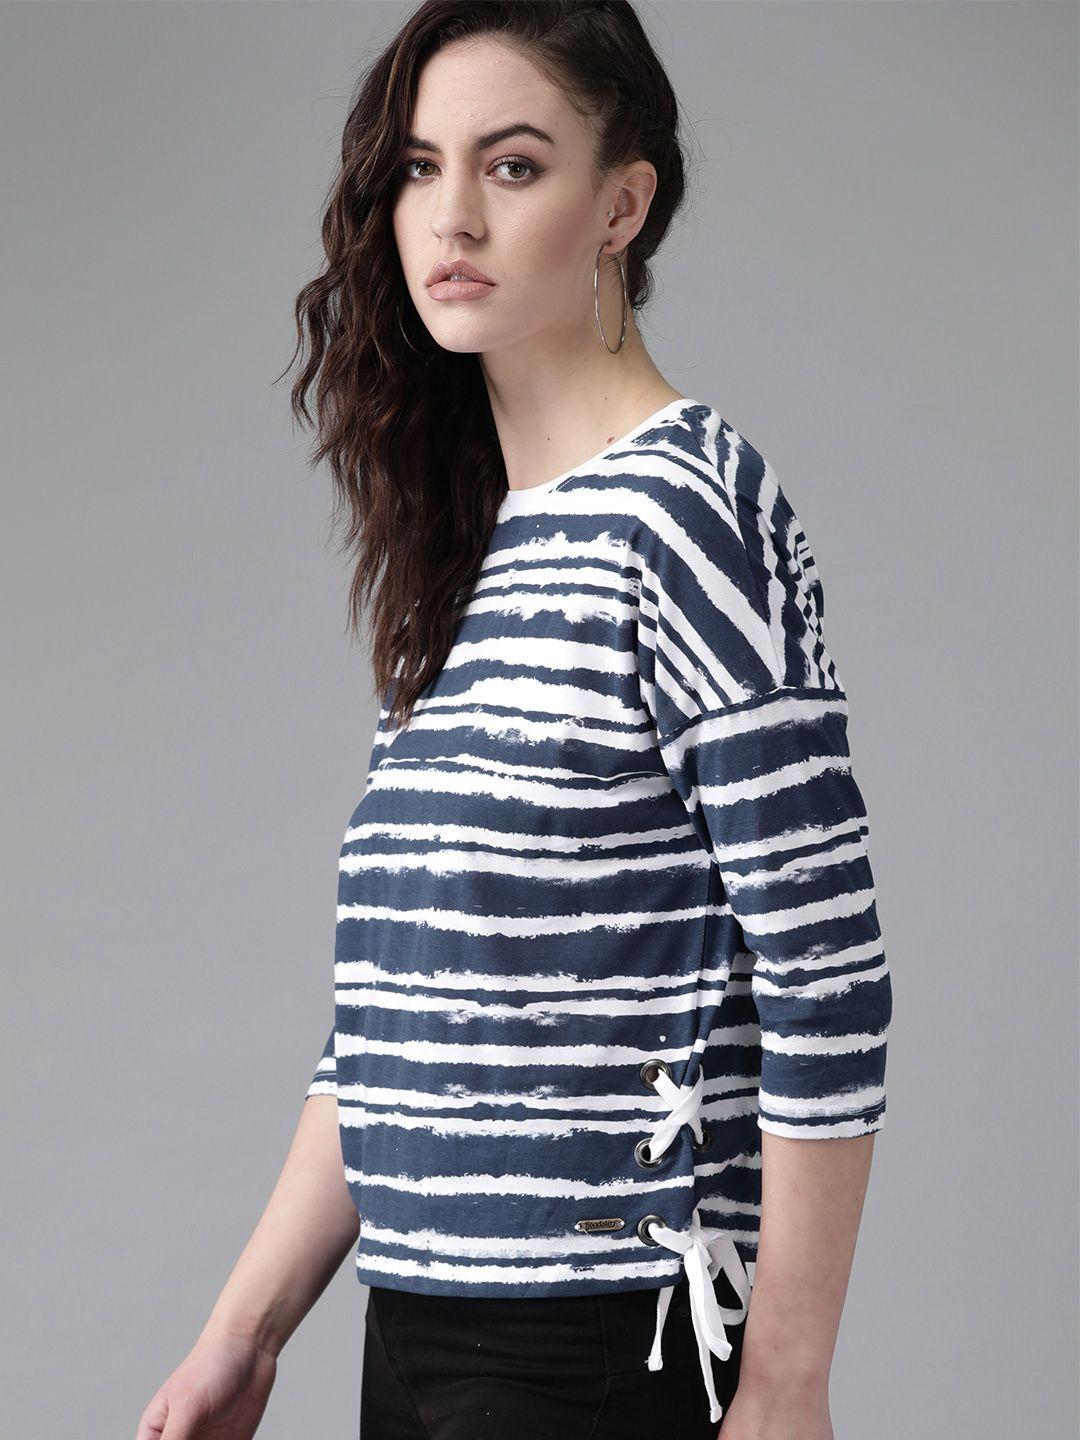 the roadster lifestyle co women & navy blue white striped pure cotton top